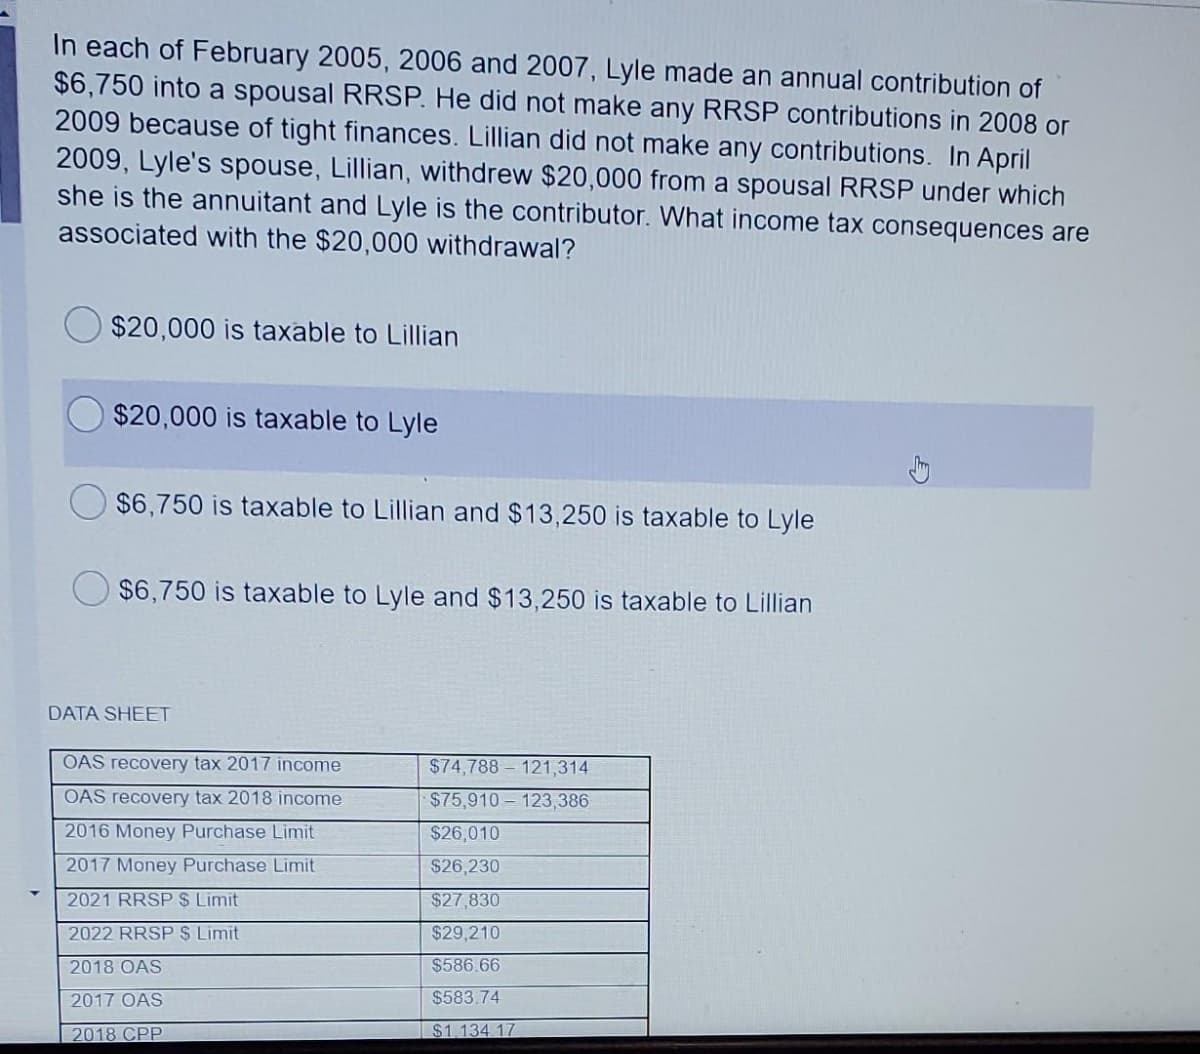 In each of February 2005, 2006 and 2007, Lyle made an annual contribution of
$6,750 into a spousal RRSP. He did not make any RRSP contributions in 2008 or
2009 because of tight finances. Lillian did not make any contributions. In April
2009, Lyle's spouse, Lillian, withdrew $20,000 from a spousal RRSP under which
she is the annuitant and Lyle is the contributor. What income tax consequences are
associated with the $20,000 withdrawal?
$20,000 is taxable to Lillian
$20,000 is taxable to Lyle
$6,750 is taxable to Lillian and $13,250 is taxable to Lyle
$6,750 is taxable to Lyle and $13,250 is taxable to Lillian
DATA SHEET
OAS recovery tax 2017 income
$74,788 - 121,314
OAS recovery tax 2018 income
$75,910 123,386
2016 Money Purchase Limit
$26,010
2017 Money Purchase Limit
S26,230
2021 RRSP$ Limit
$27,830
2022 RRSP S Limit
$29,210
2018 OAS
$586.66
2017 OAS
$583.74
2018 CPP
$1.134 17
